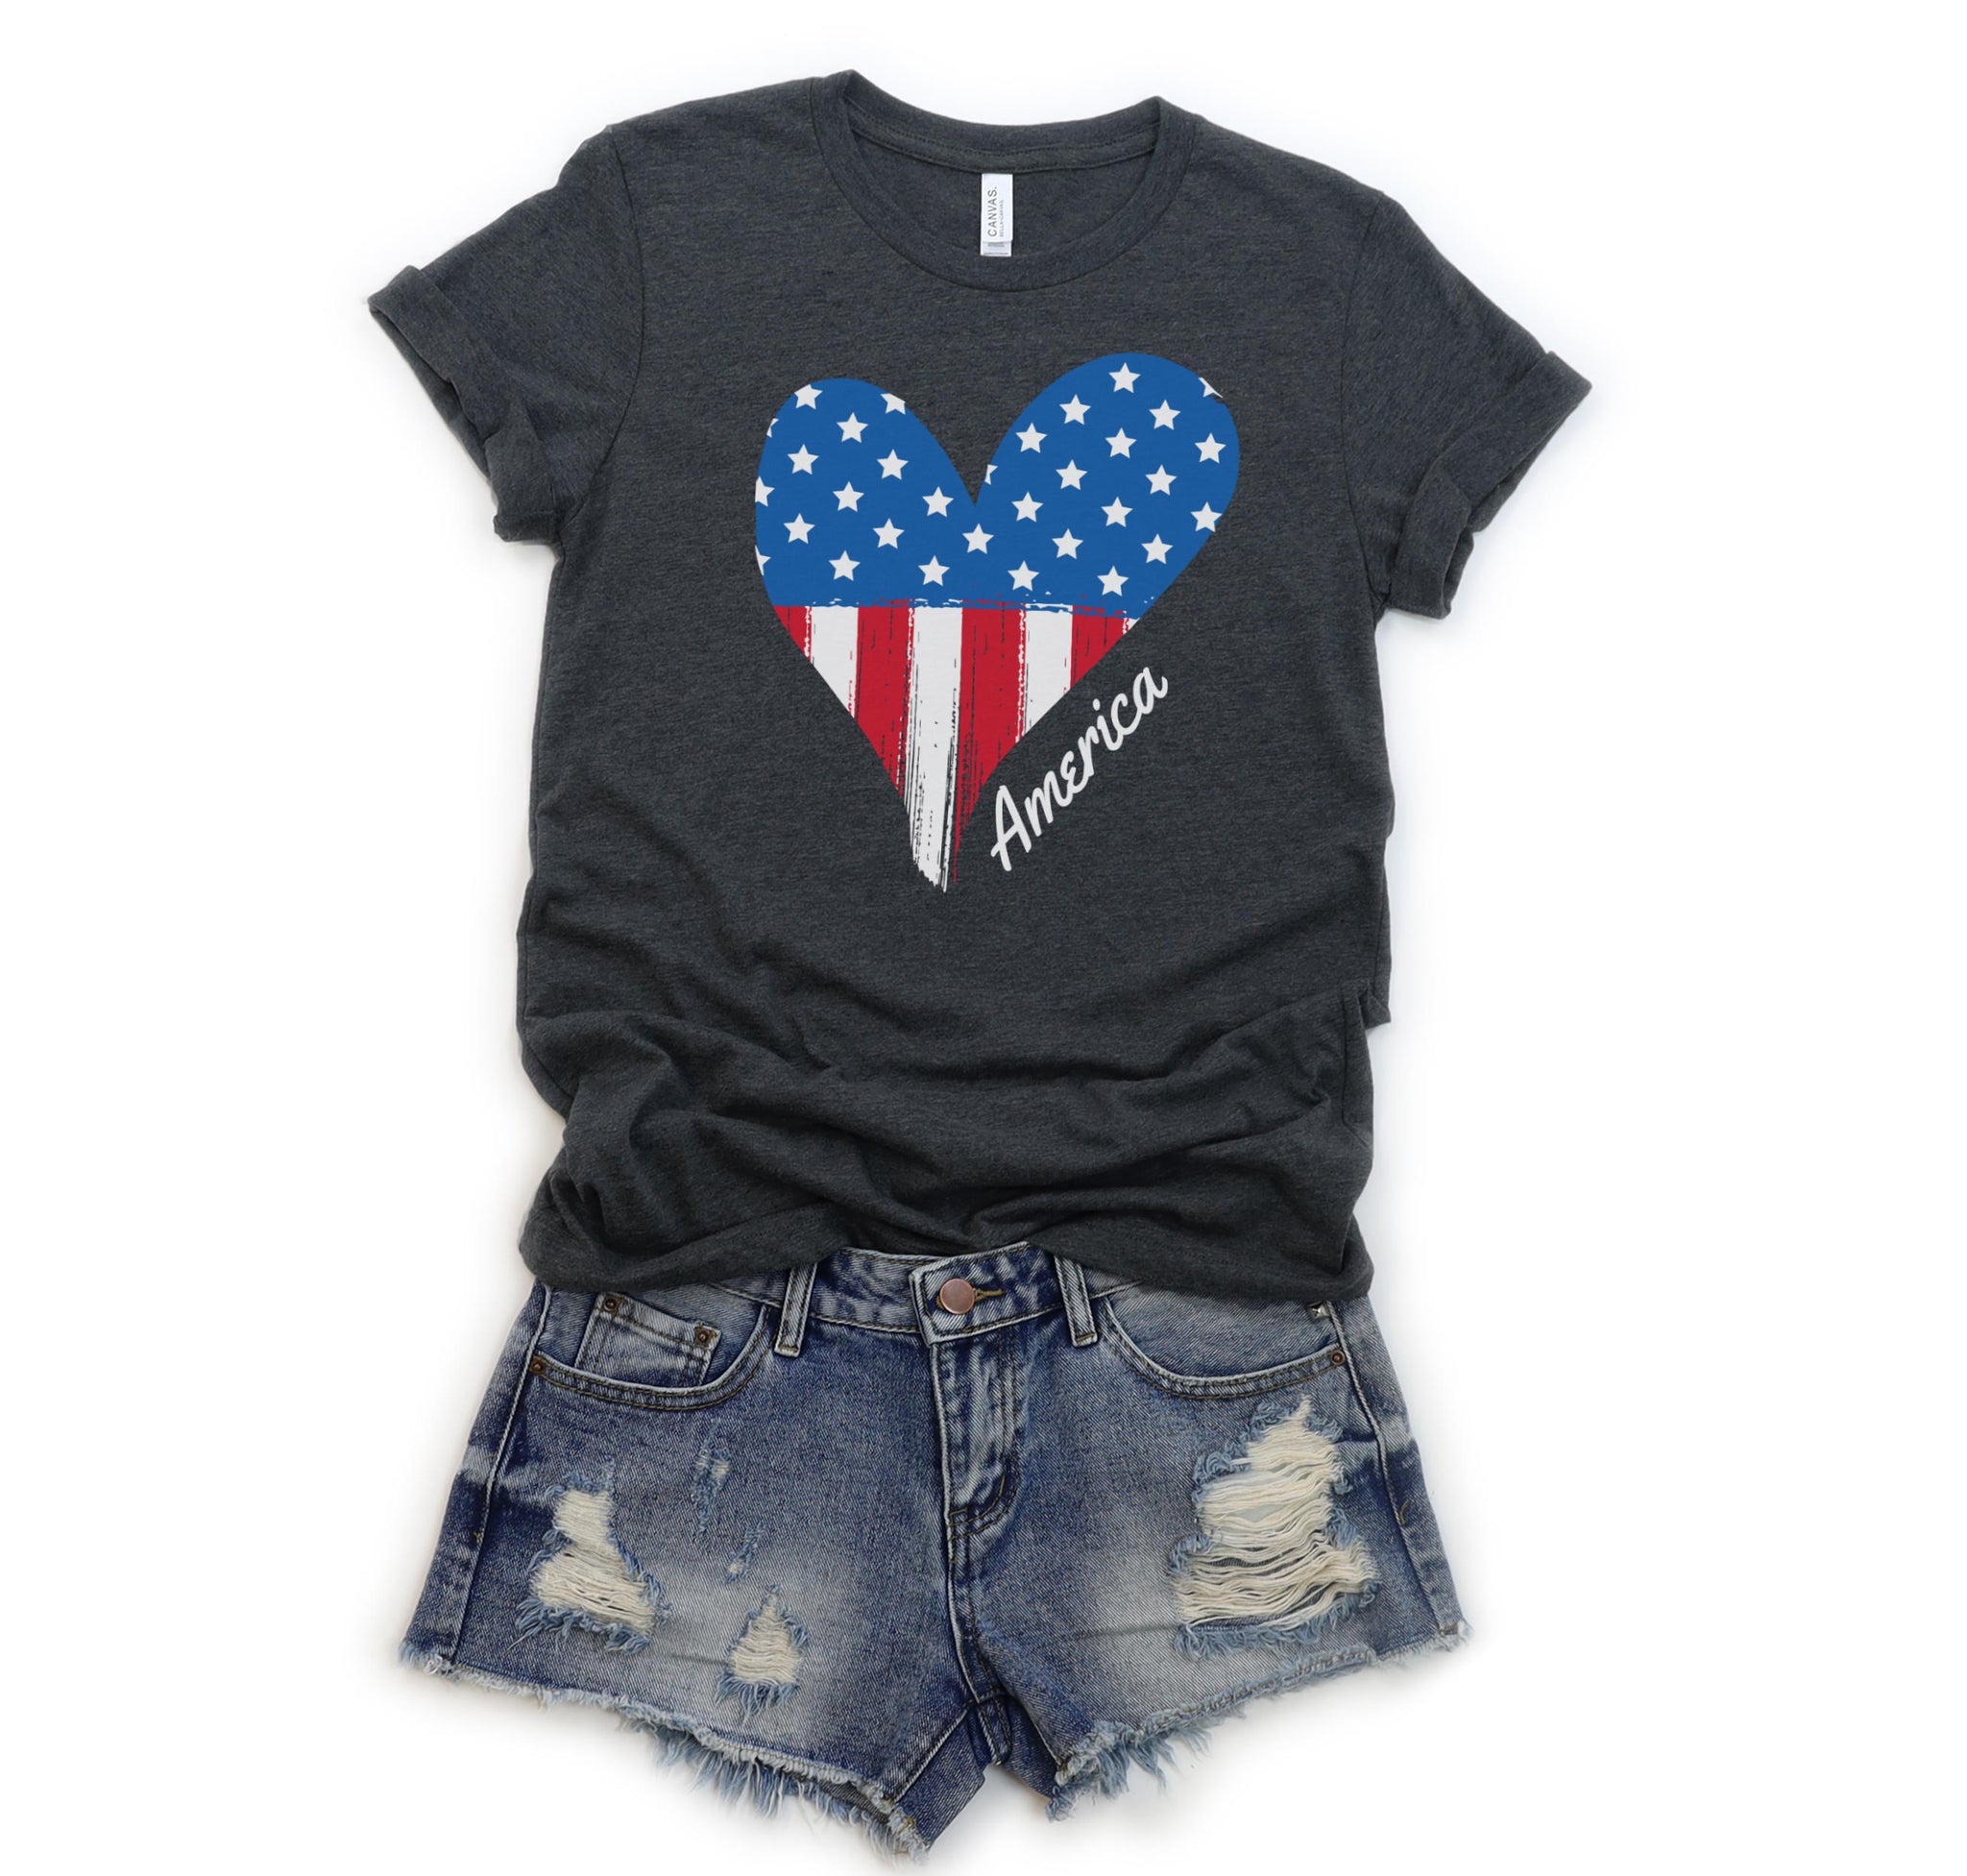 Patriotic America Heart Youth T-Shirt for Fourth of July, Memorial Day, or any holiday celebrating the USA.